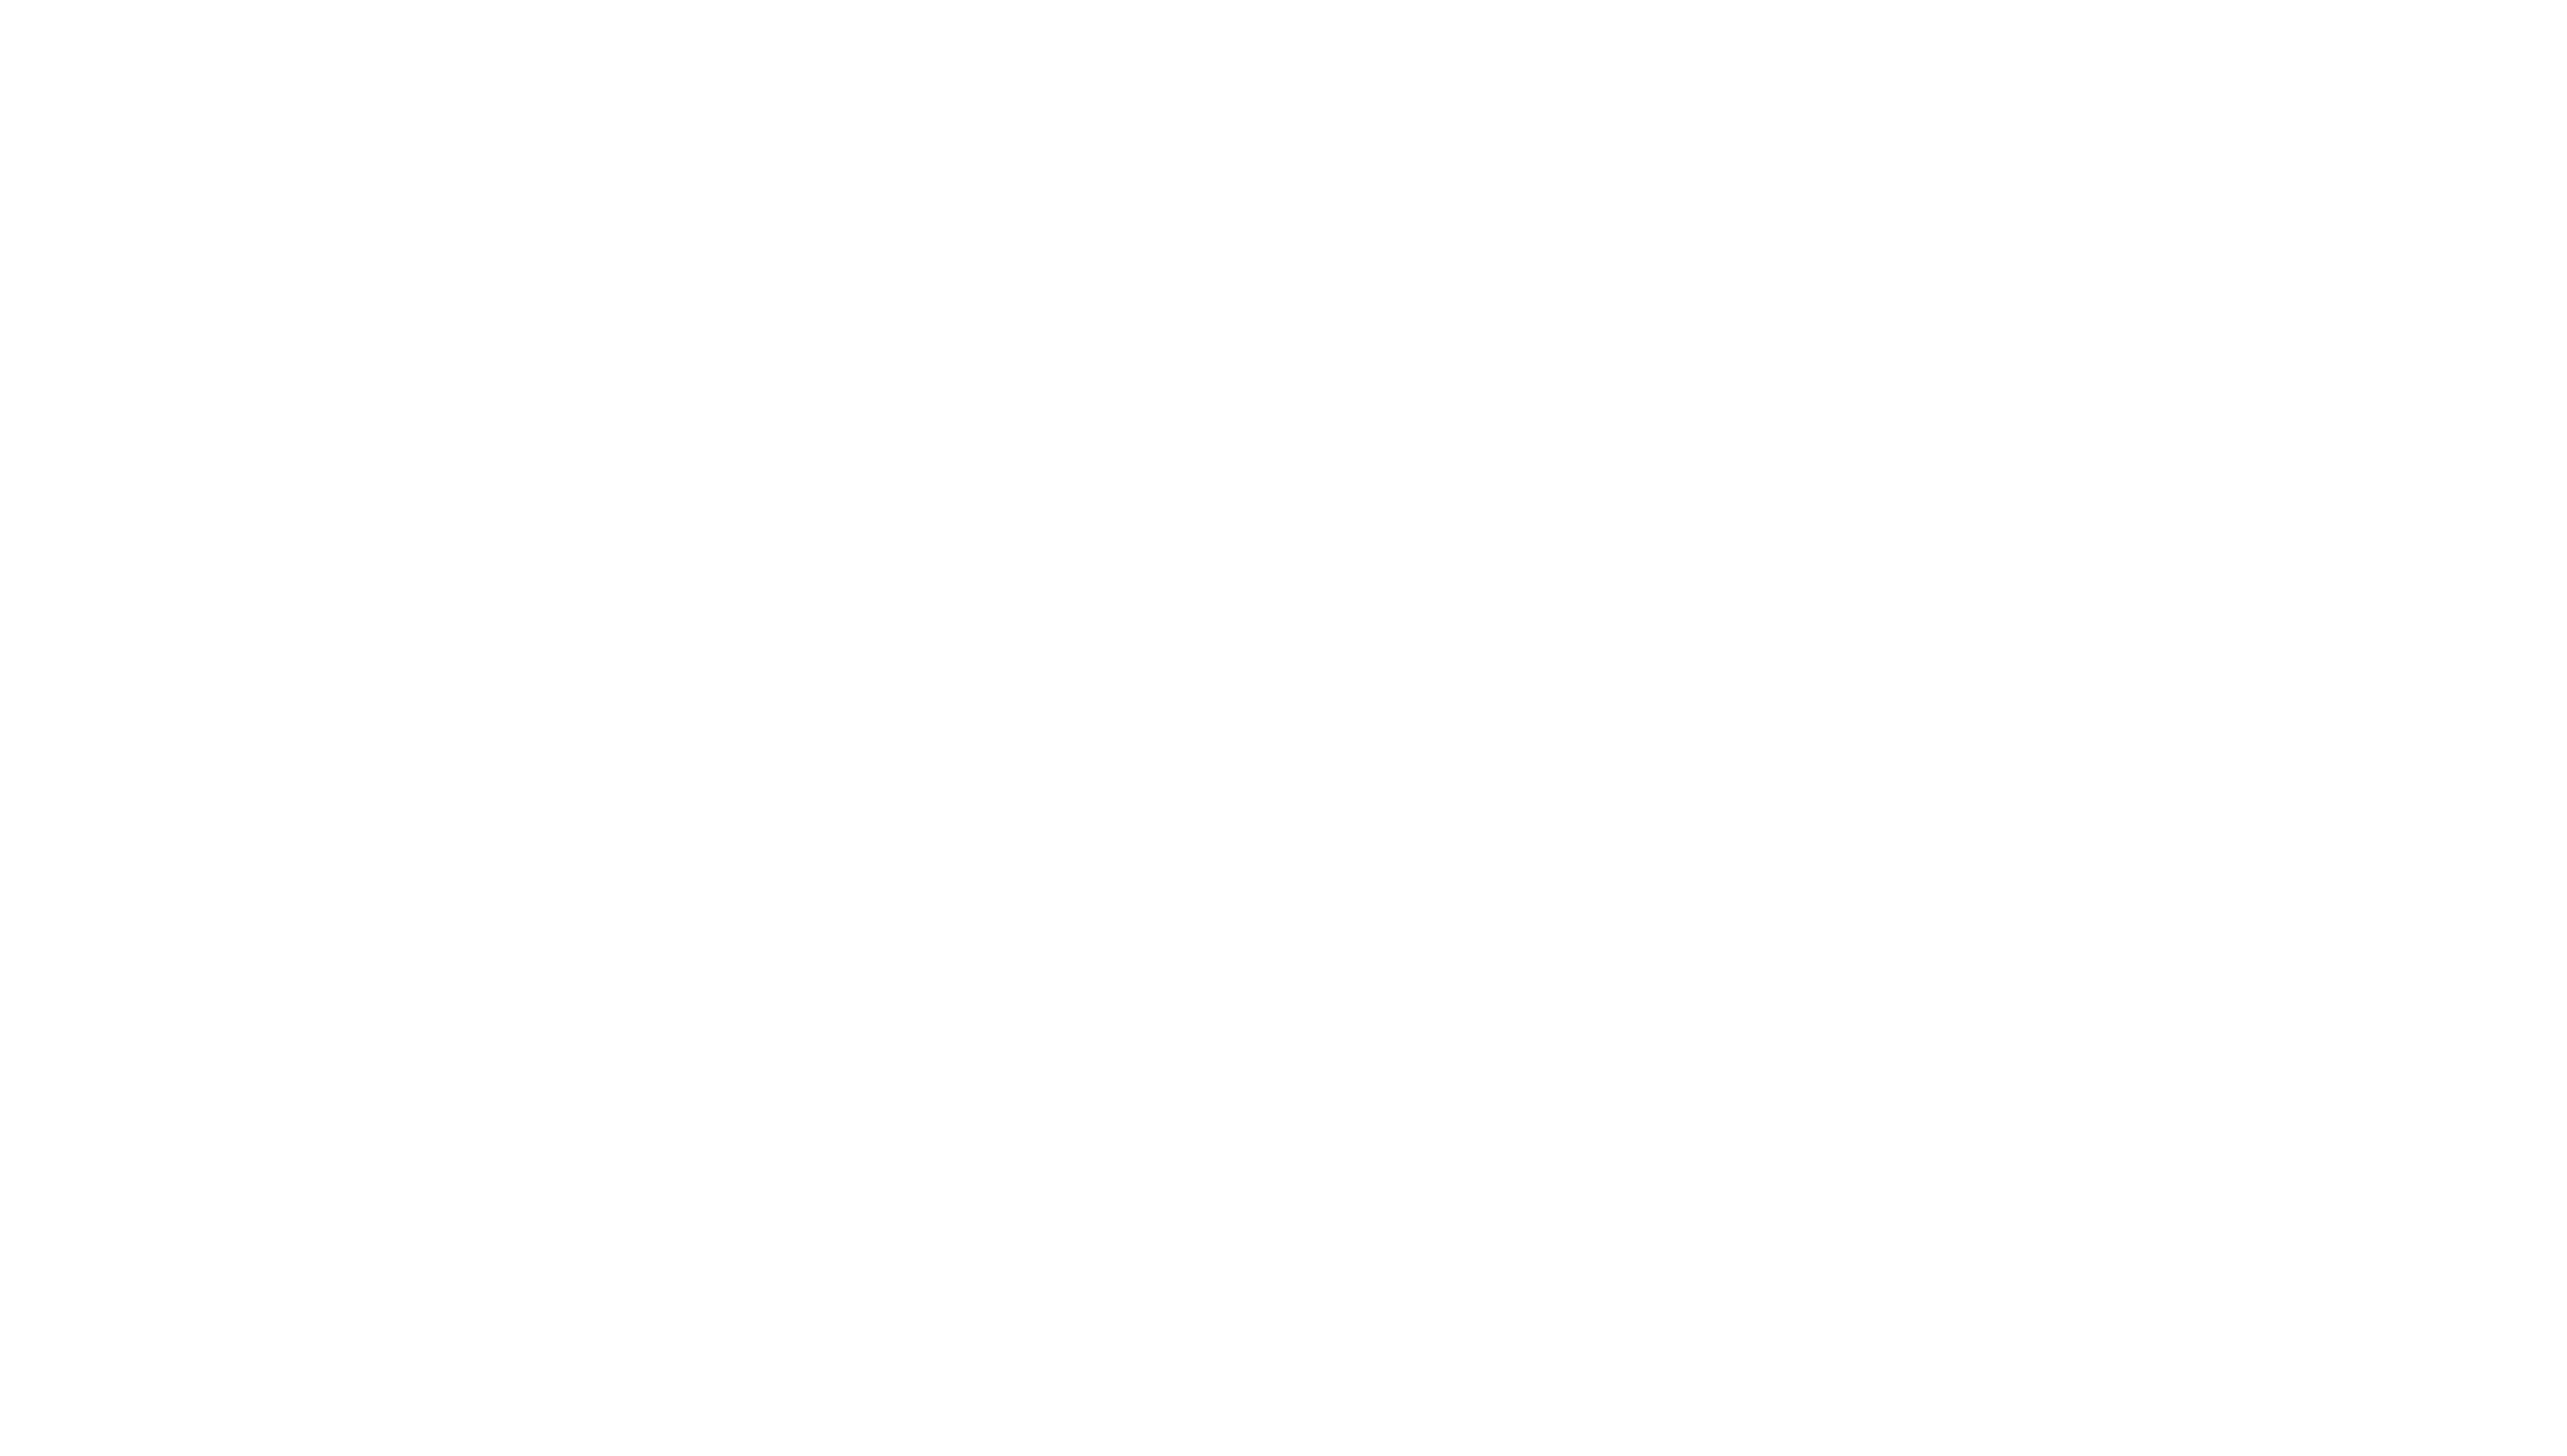 Association of Independent Doctors (AID)